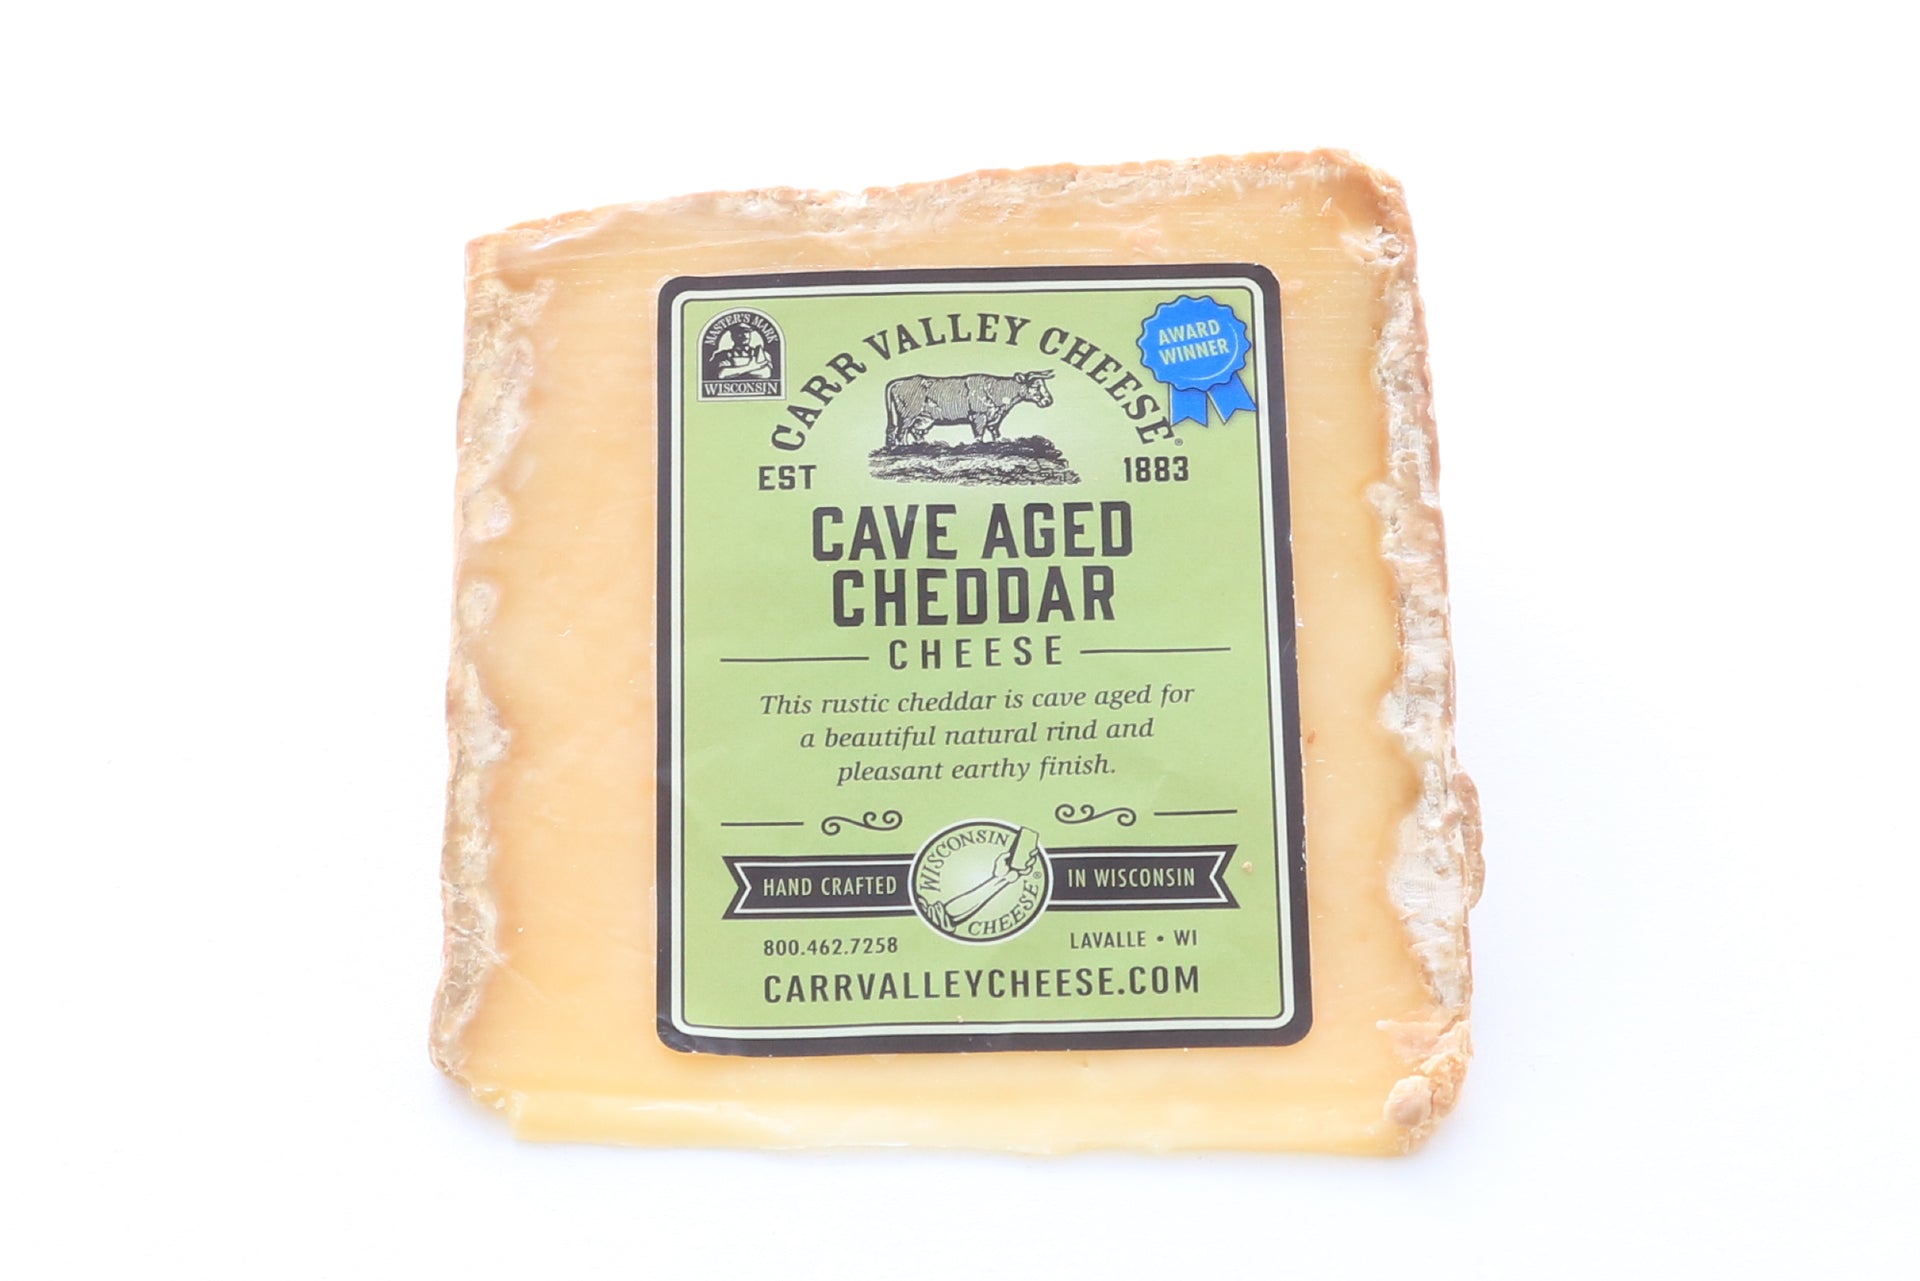 Deppeler's Cheddar Cheese – Aged